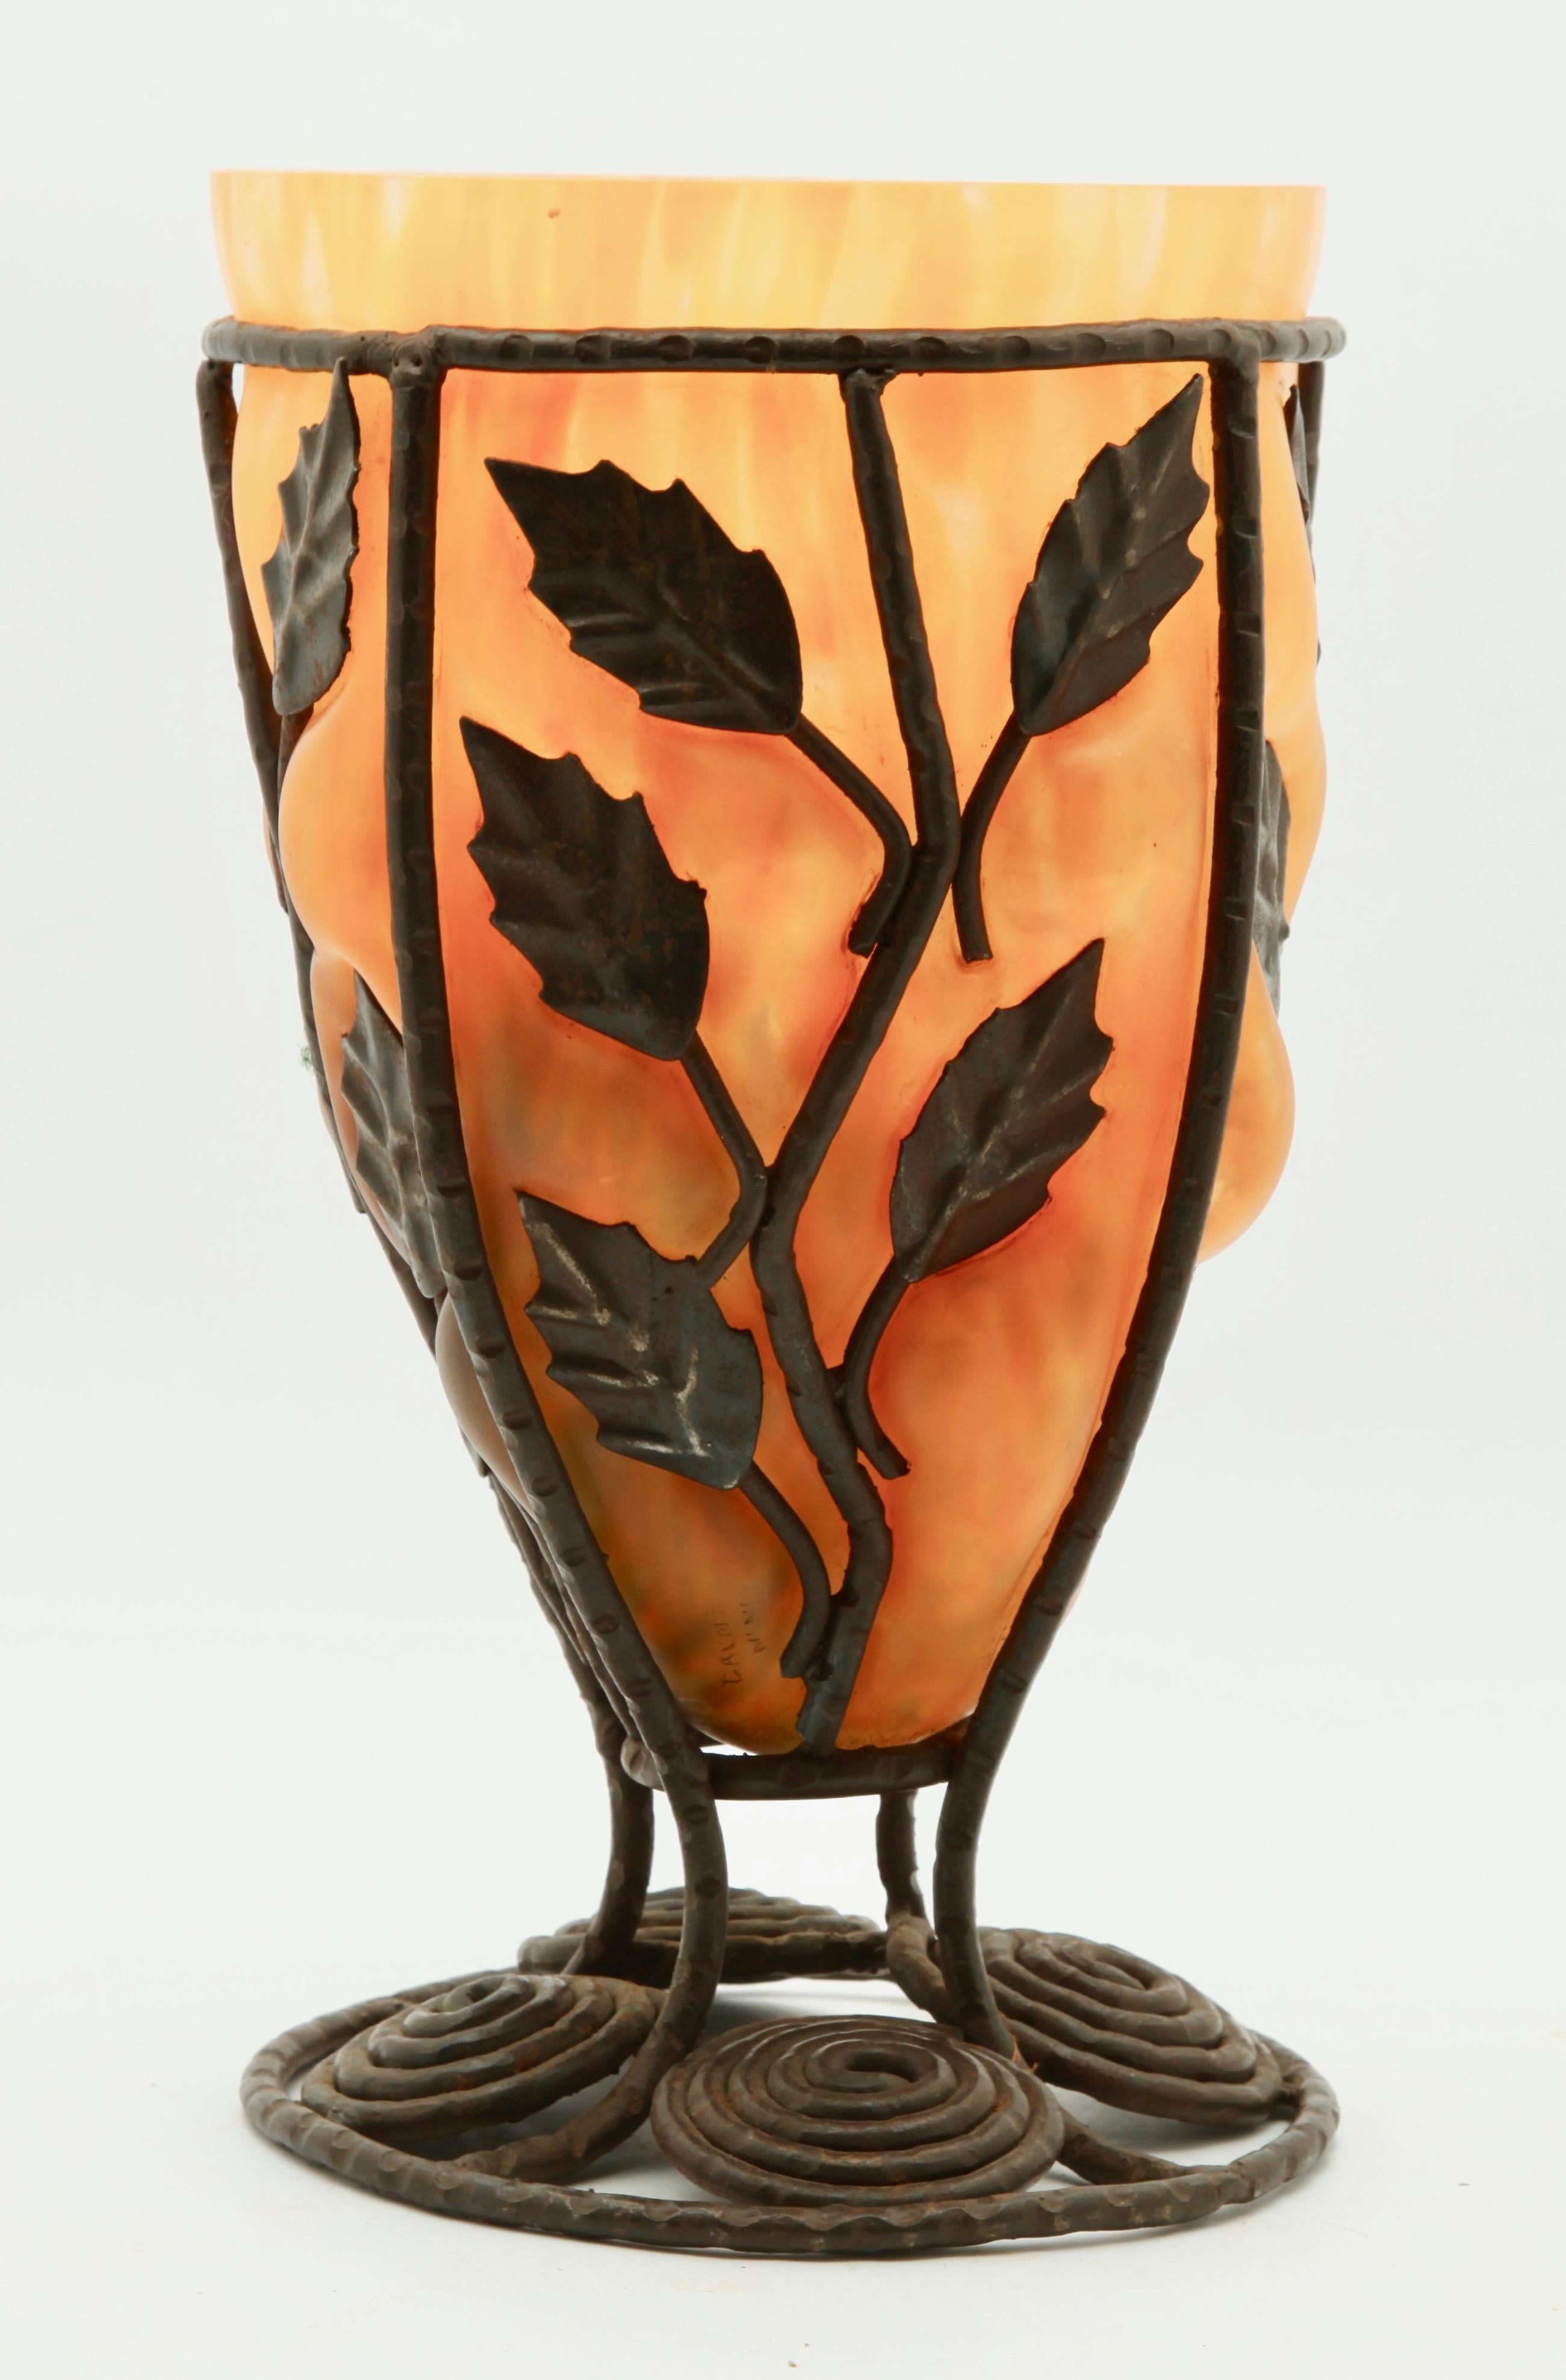 This Art Deco style glass vase, Daum (signed) blown out into wrought metal frame with organic swirls, tree branches and leaves, is done in the style of Louis Majorelle for Daum
Measures: 11.7 by 6.5 inches (29.8 by 16.5 cm).
Condition is good.
There